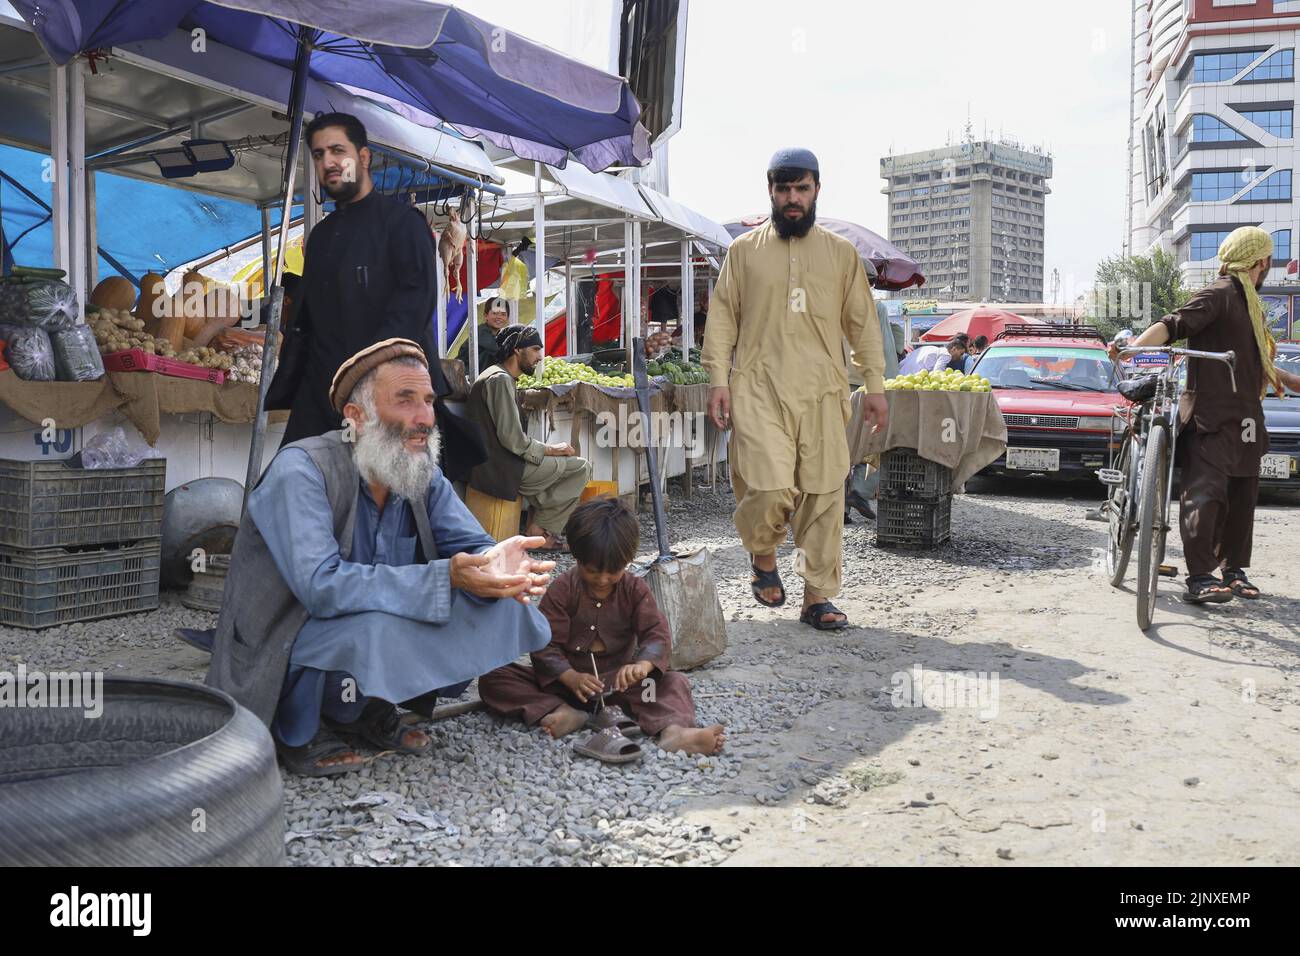 A man (L) and a child sitting on the ground beg in Kabul on Aug. 14, 2022. (Kyodo)==Kyodo  Photo via Newscom Stock Photo